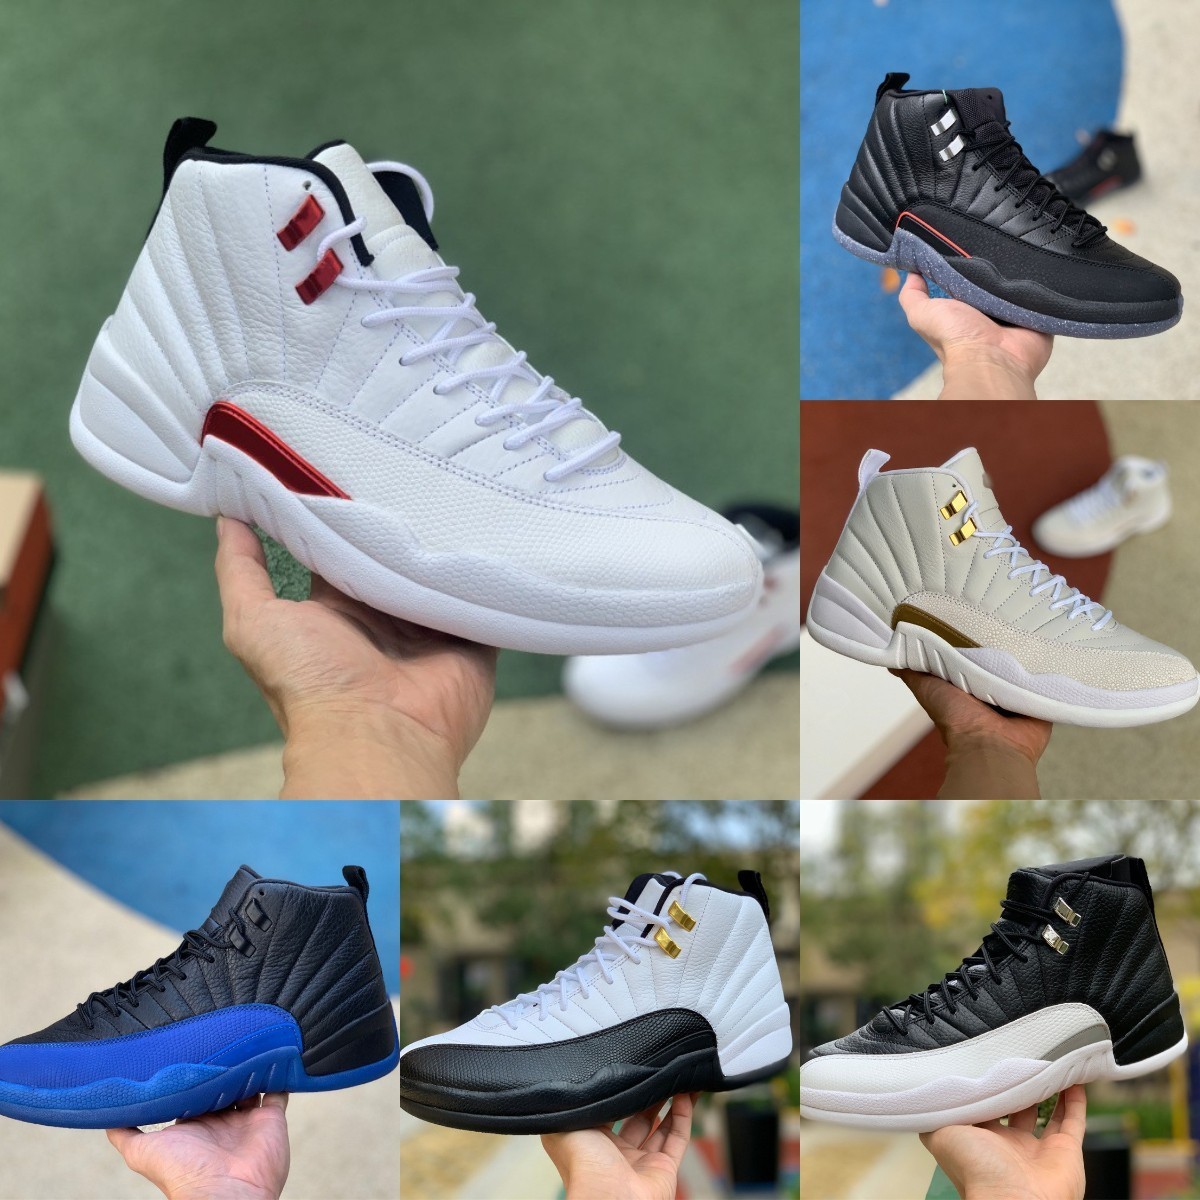 

Jumpman Utility Grind 12 12s Mens High Basketball Shoes Jorden Playoff Indigo Flu Game Dark Concord OVO White Grey Reverse Taxi Fiba Gamma Blue Trainer Sneakers, Please contact us